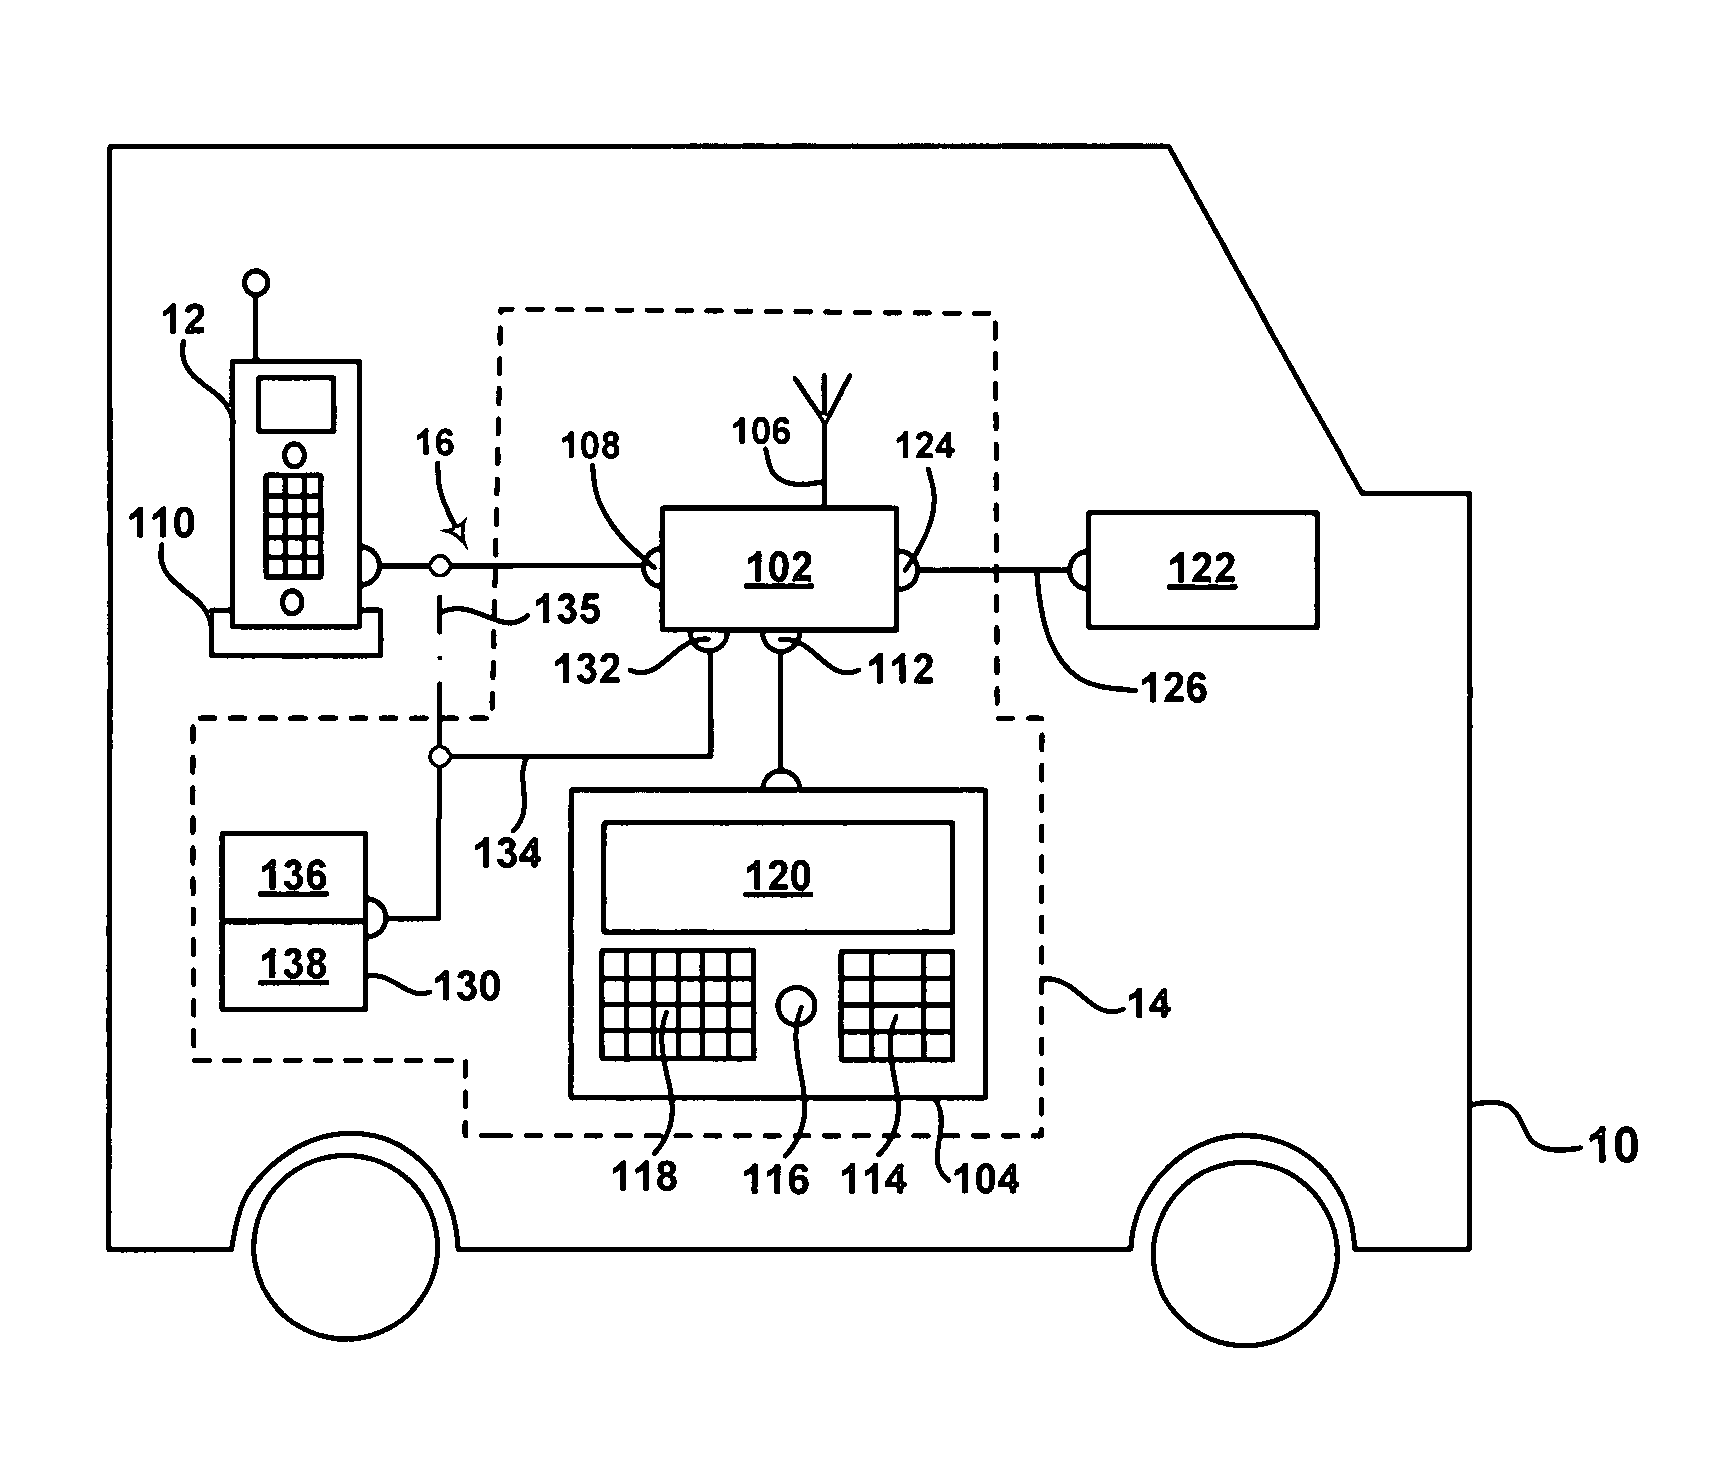 Enhanced in-vehicle wireless communication system handset operation